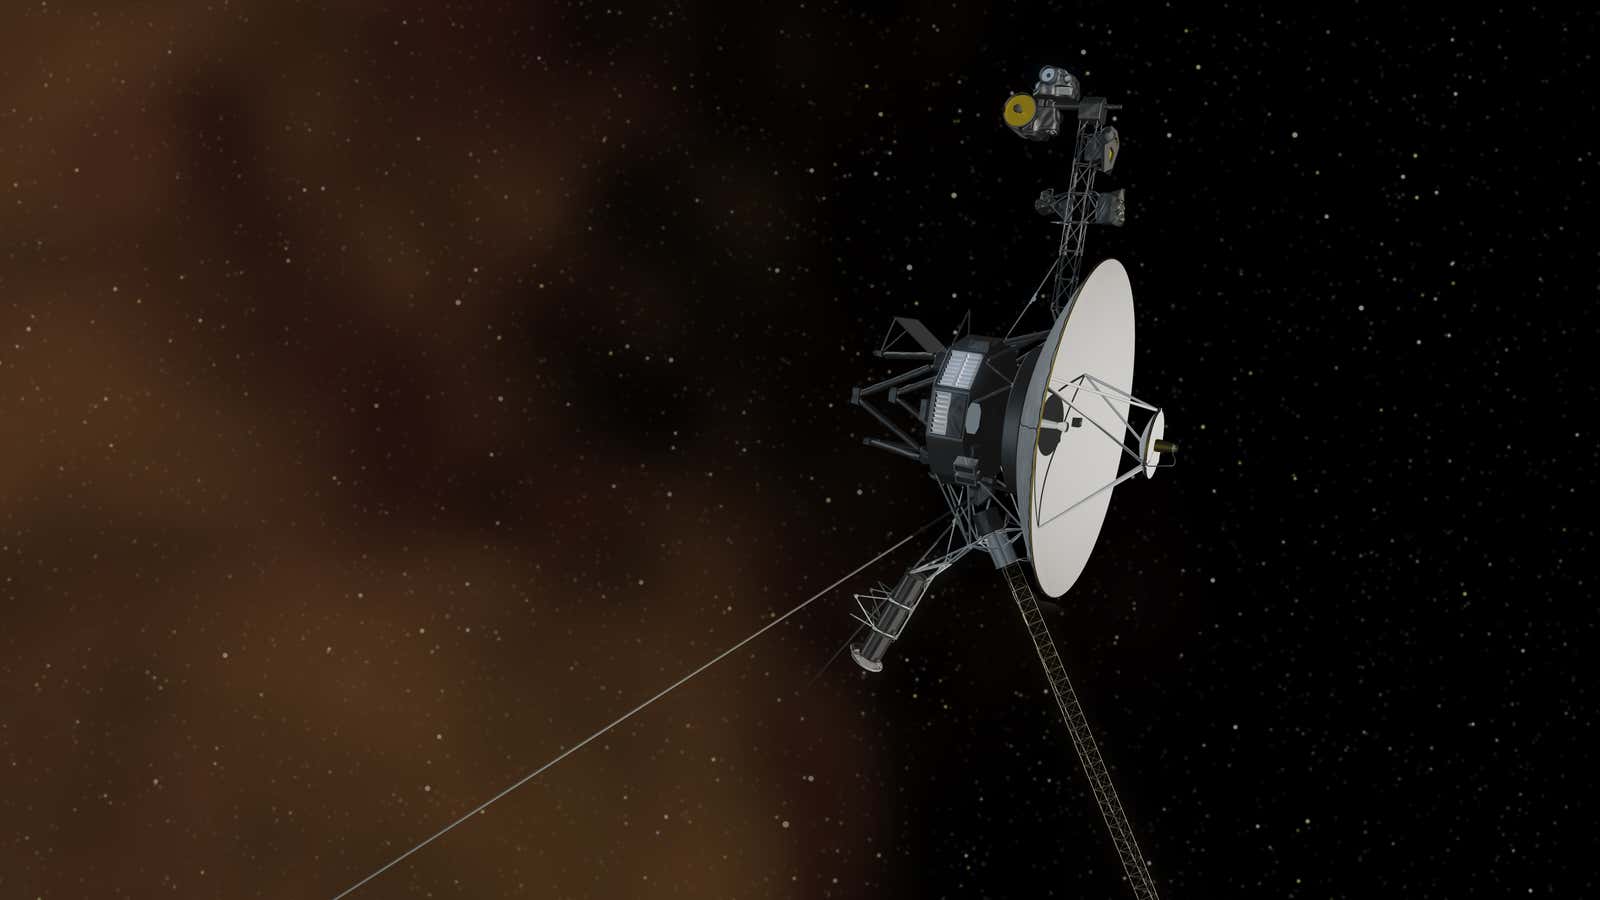 Both Voyager probes are now in interstellar space.